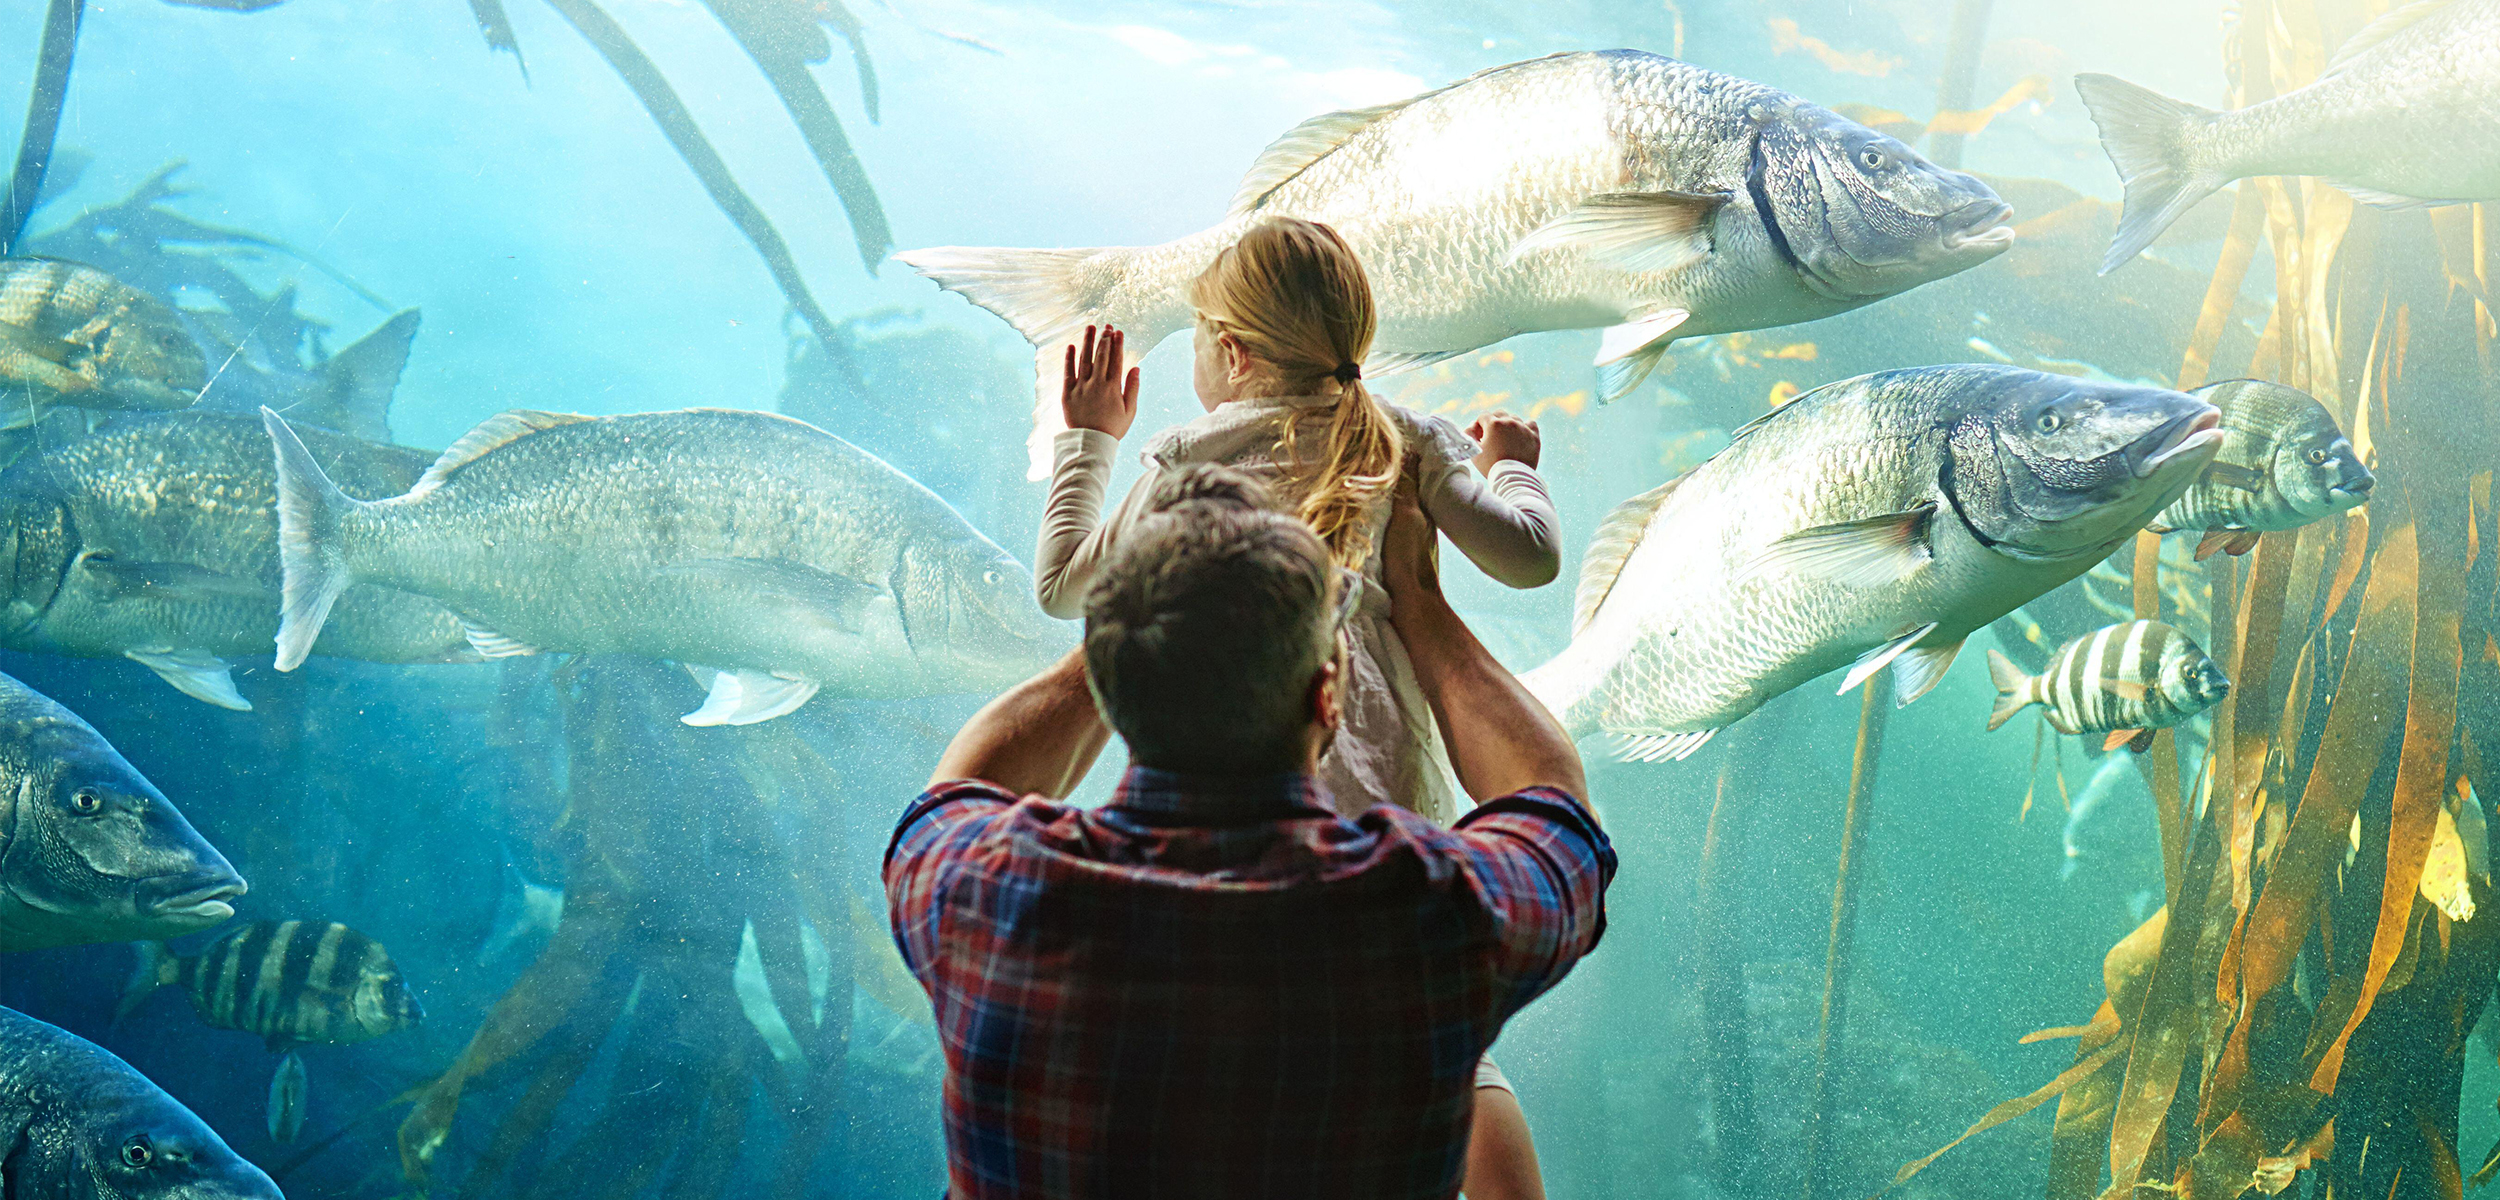 A white man holds up his daughter to an aquarium filled with large silver fish.